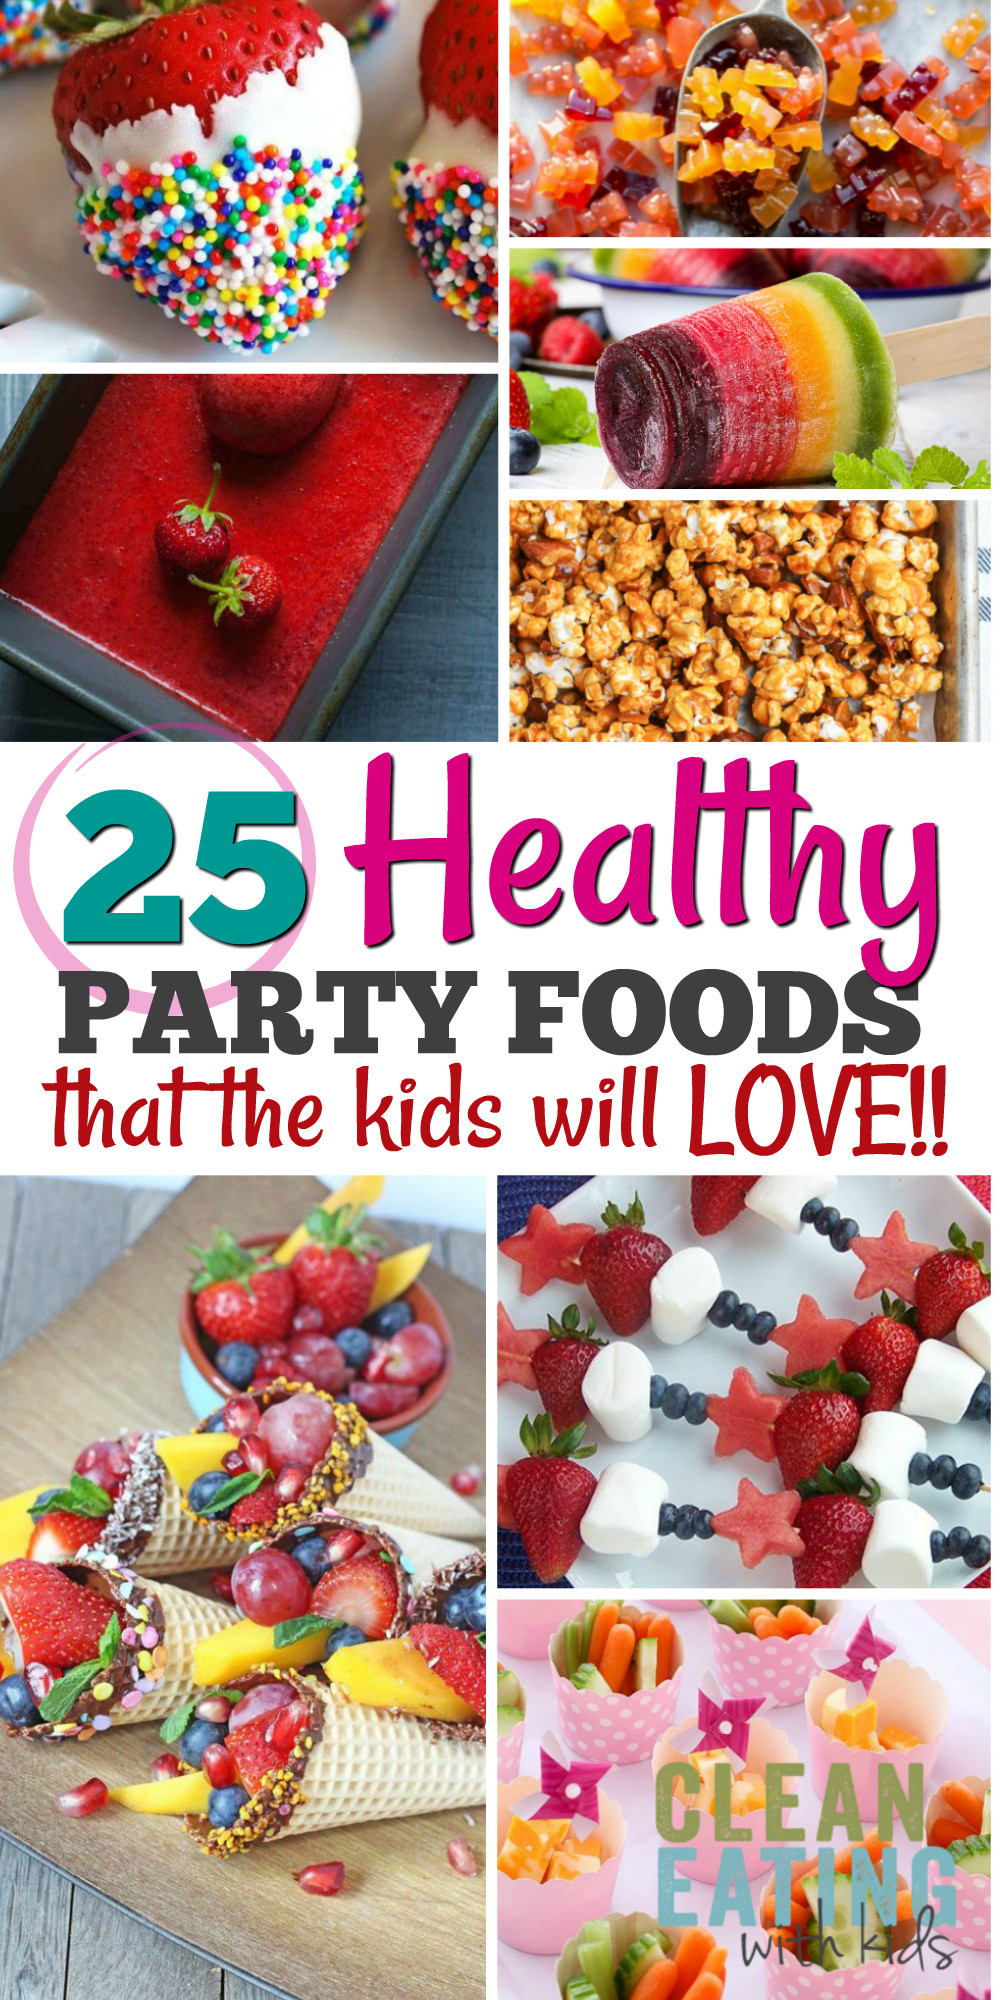 Kids Birthday Party Recipes
 25 Healthy Birthday Party Food Ideas Clean Eating with kids